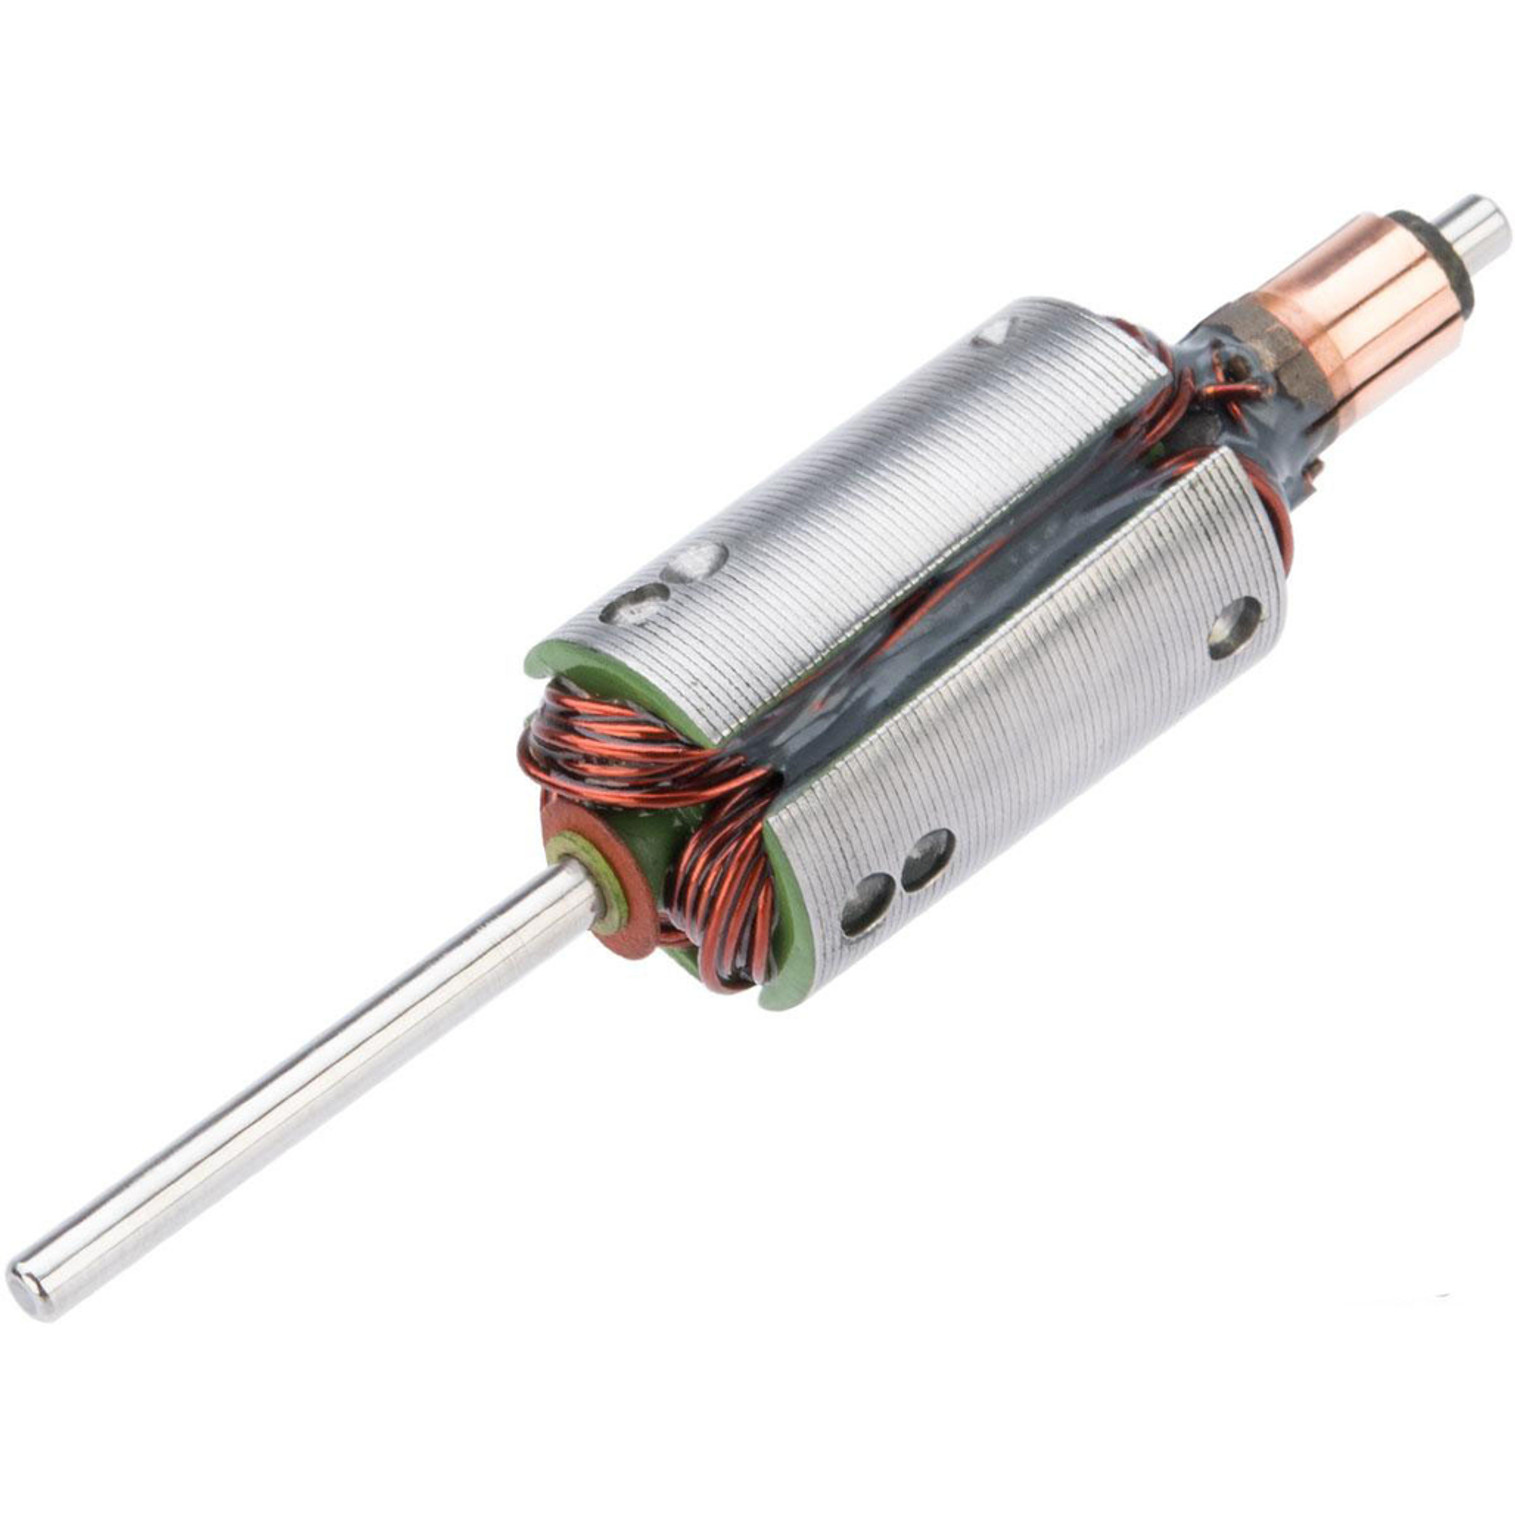 6mmProShop Tienly High Performance Drop-In Armature for Long Type Motor (Type: 35,000 RPM)